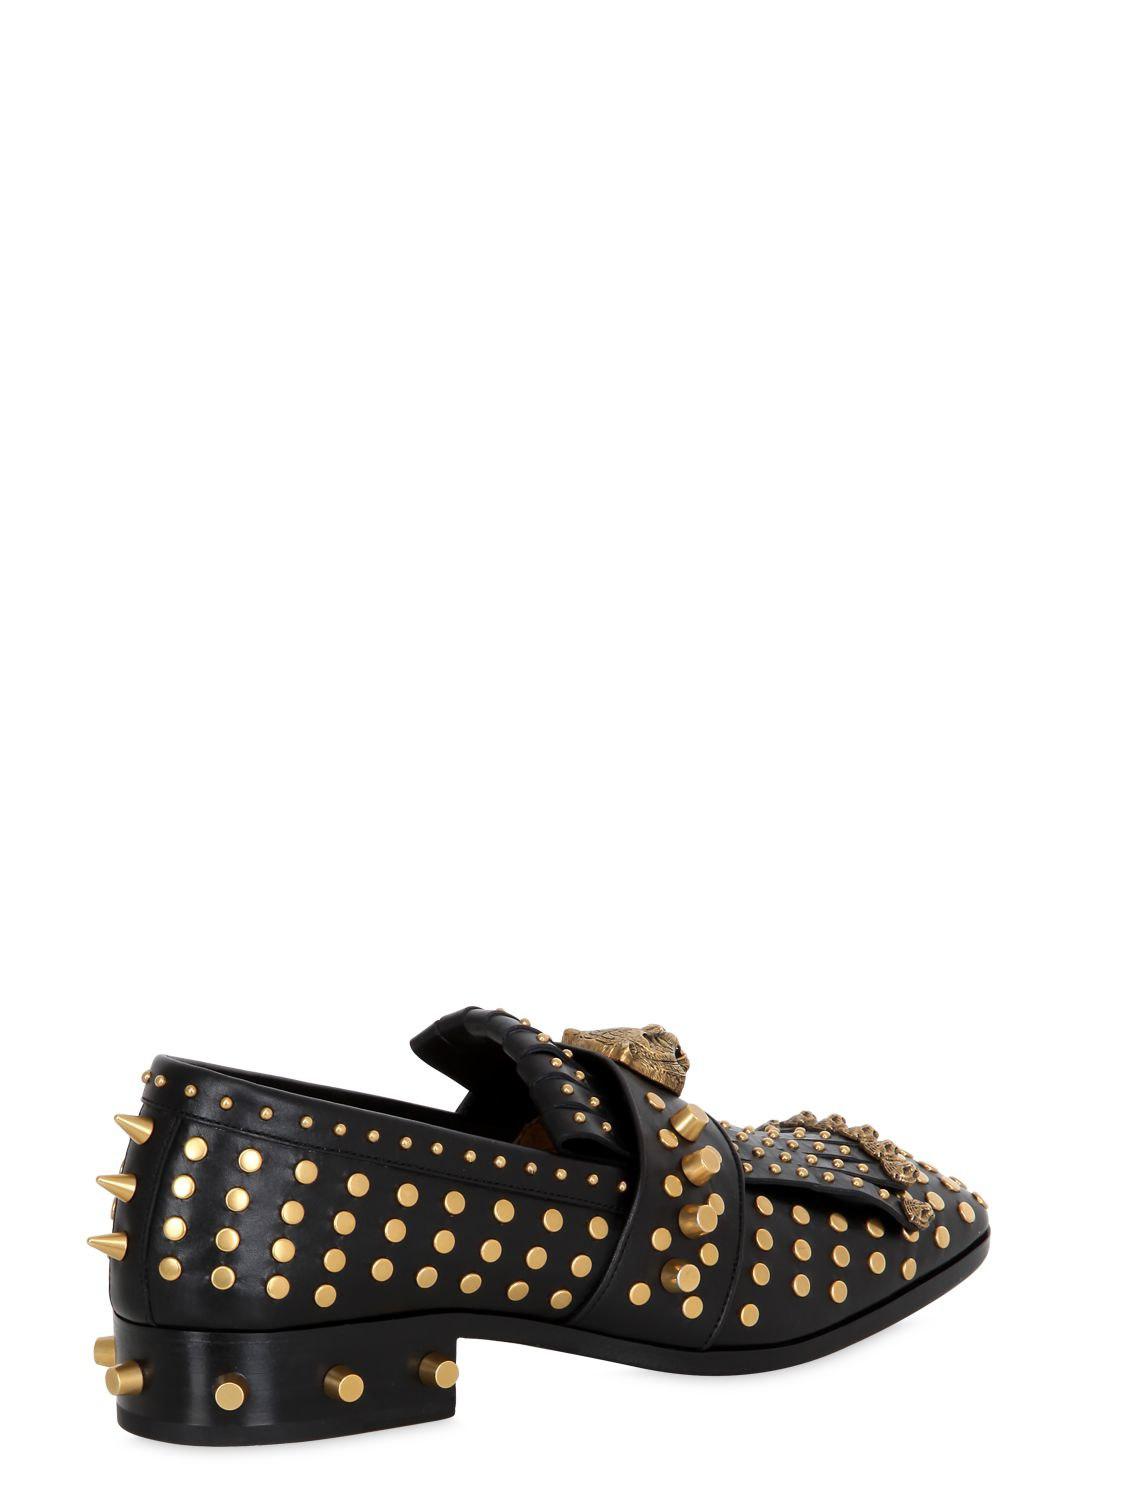 Lyst - Gucci Studded & Tiger Leather Fringed Loafers in Black